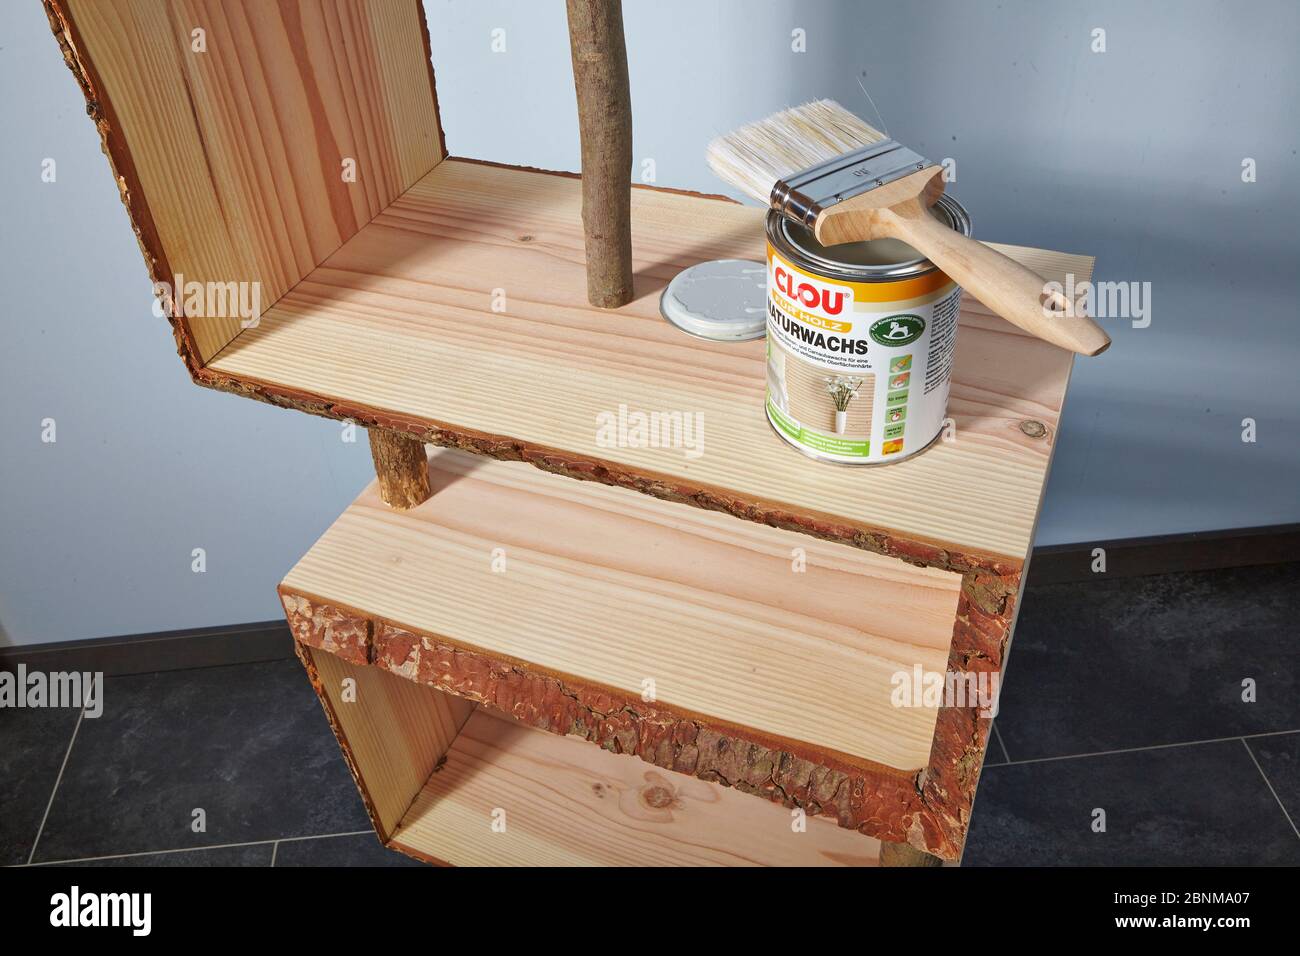 Building a wooden shelf, do-it-yourself production, step-by-step, step 12, sealing the wood with natural wax, flat brush Stock Photo